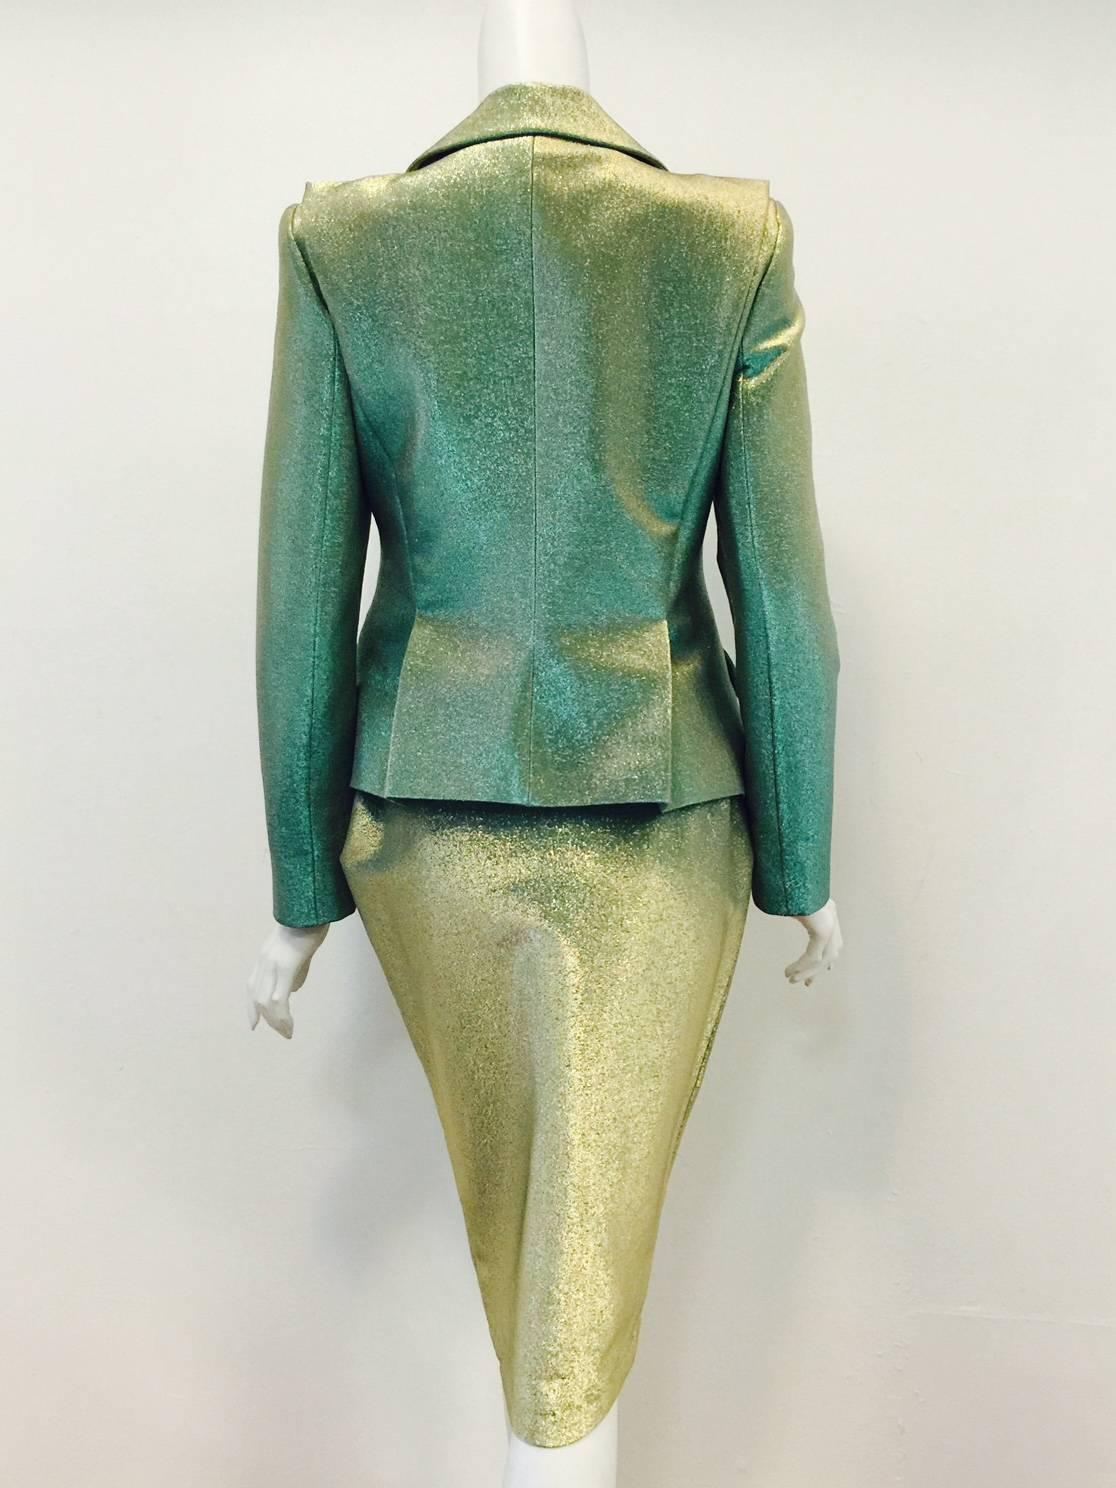 Gray Vivienne Westwood Anglomania Green and Gold Iridescent Cotton Skirt Suit 